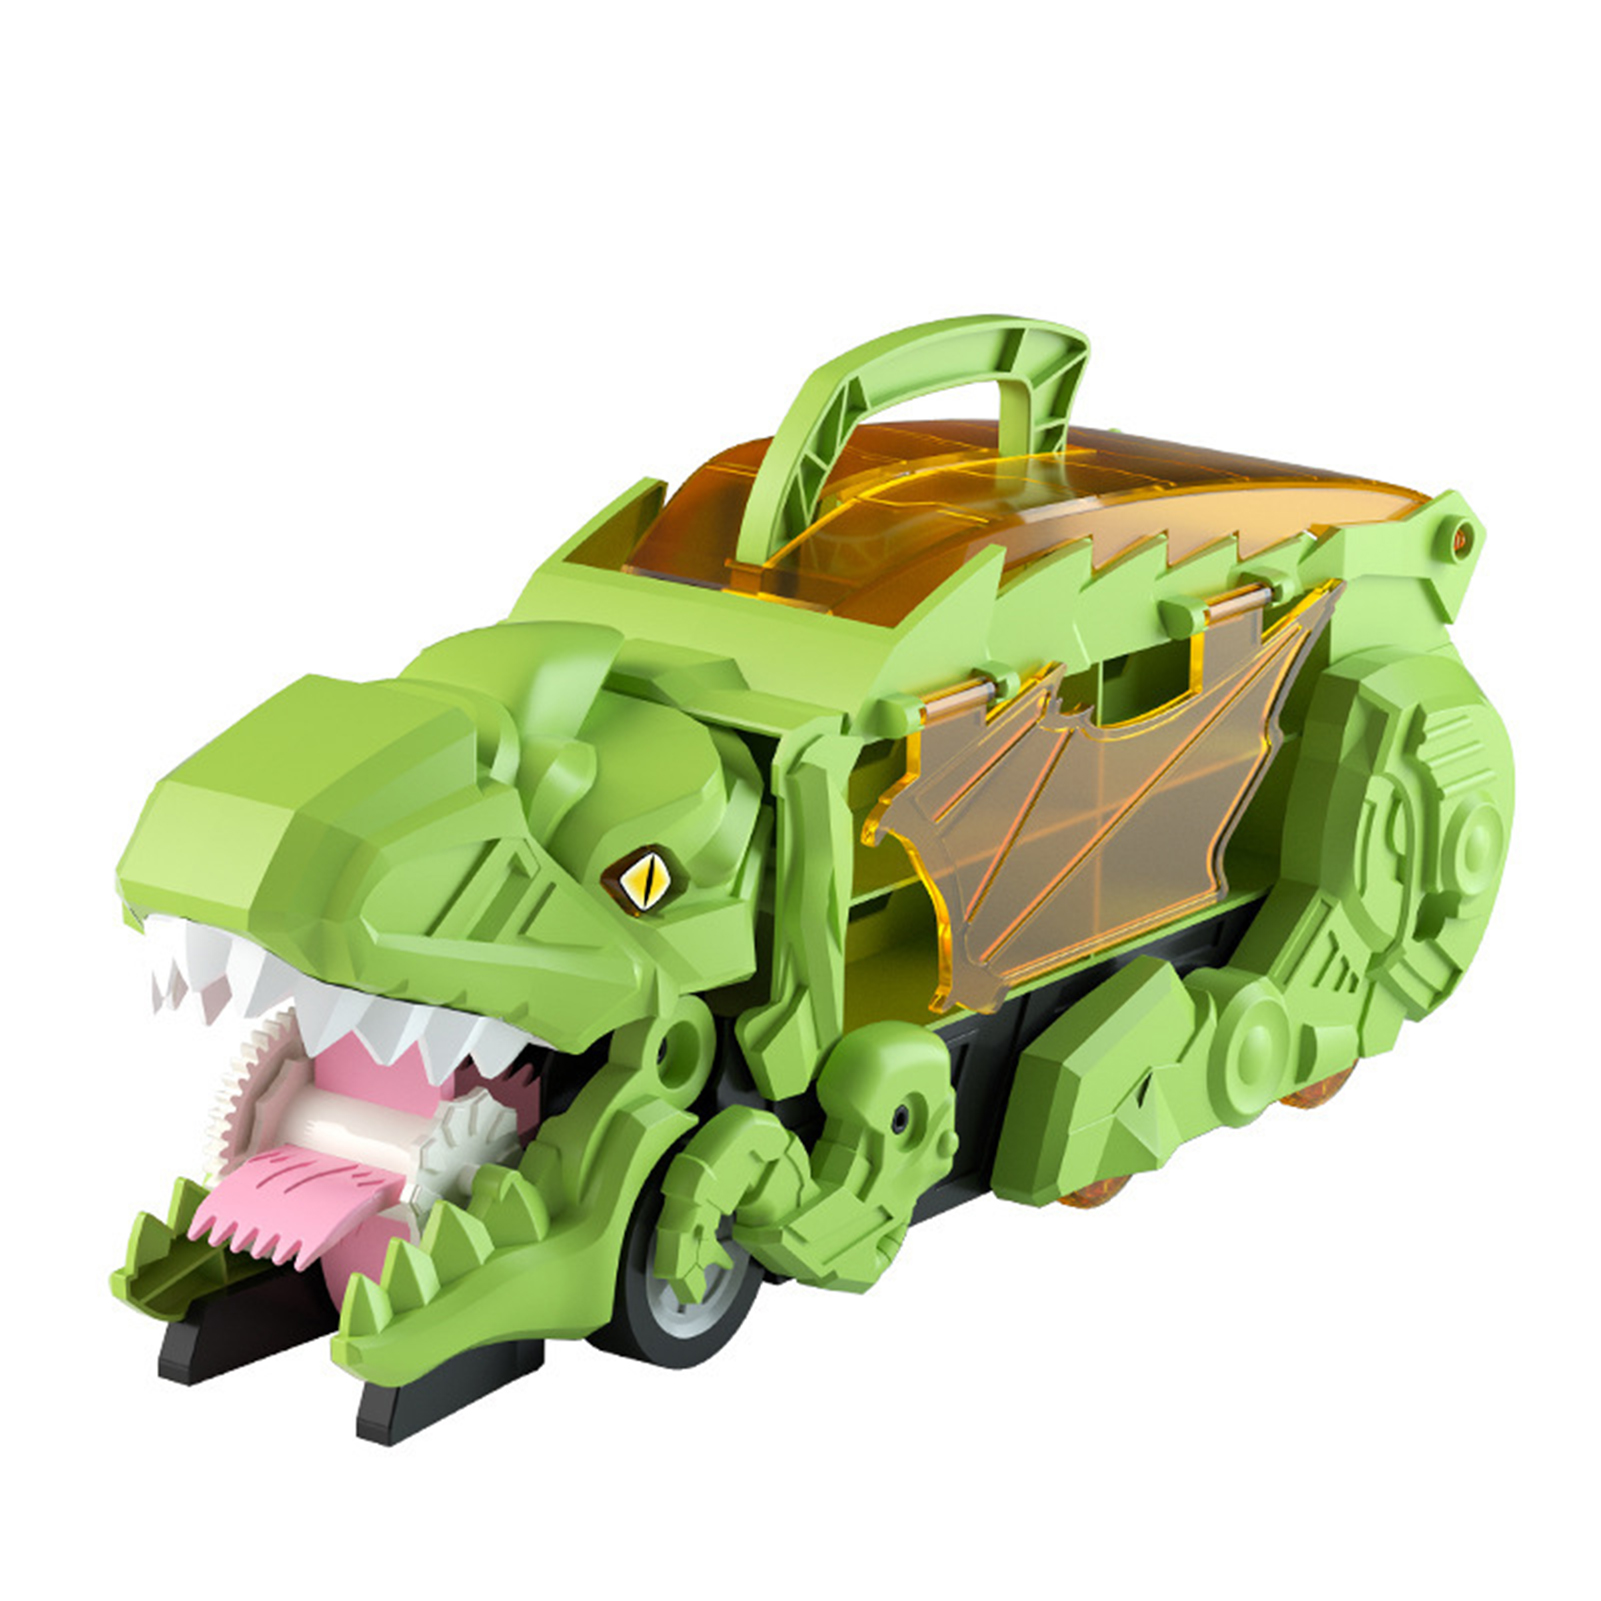 218s Dinosaur Swallow Truck Toy Swallowing Car Dinosaur Toy Dinosaur Truck